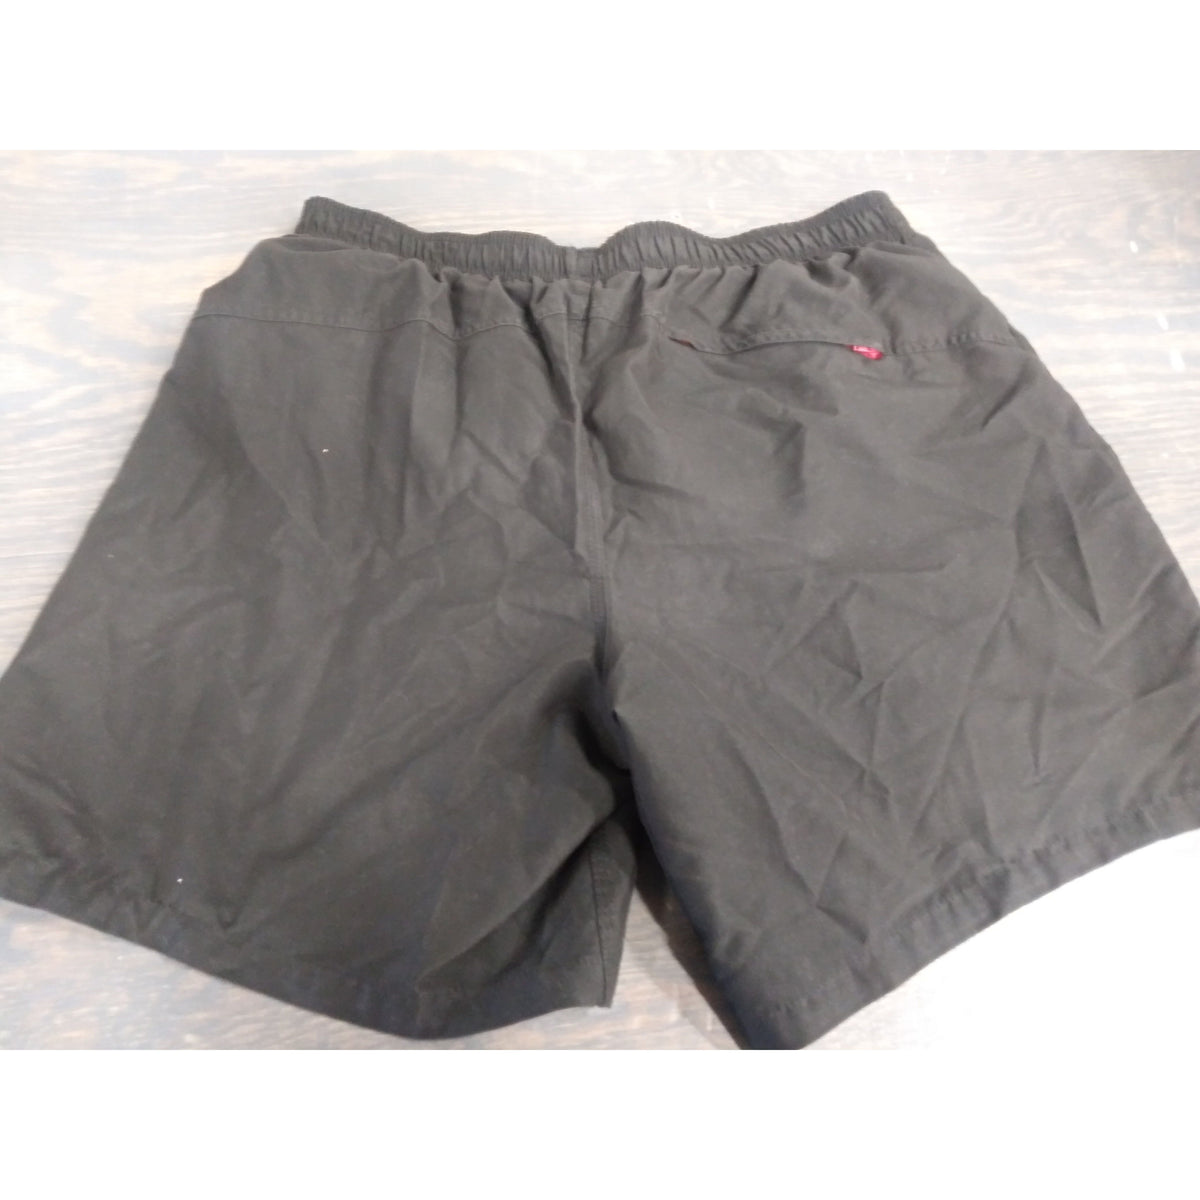 Speedo Rally Volley Shorts - Black - Large - Used - Acceptable